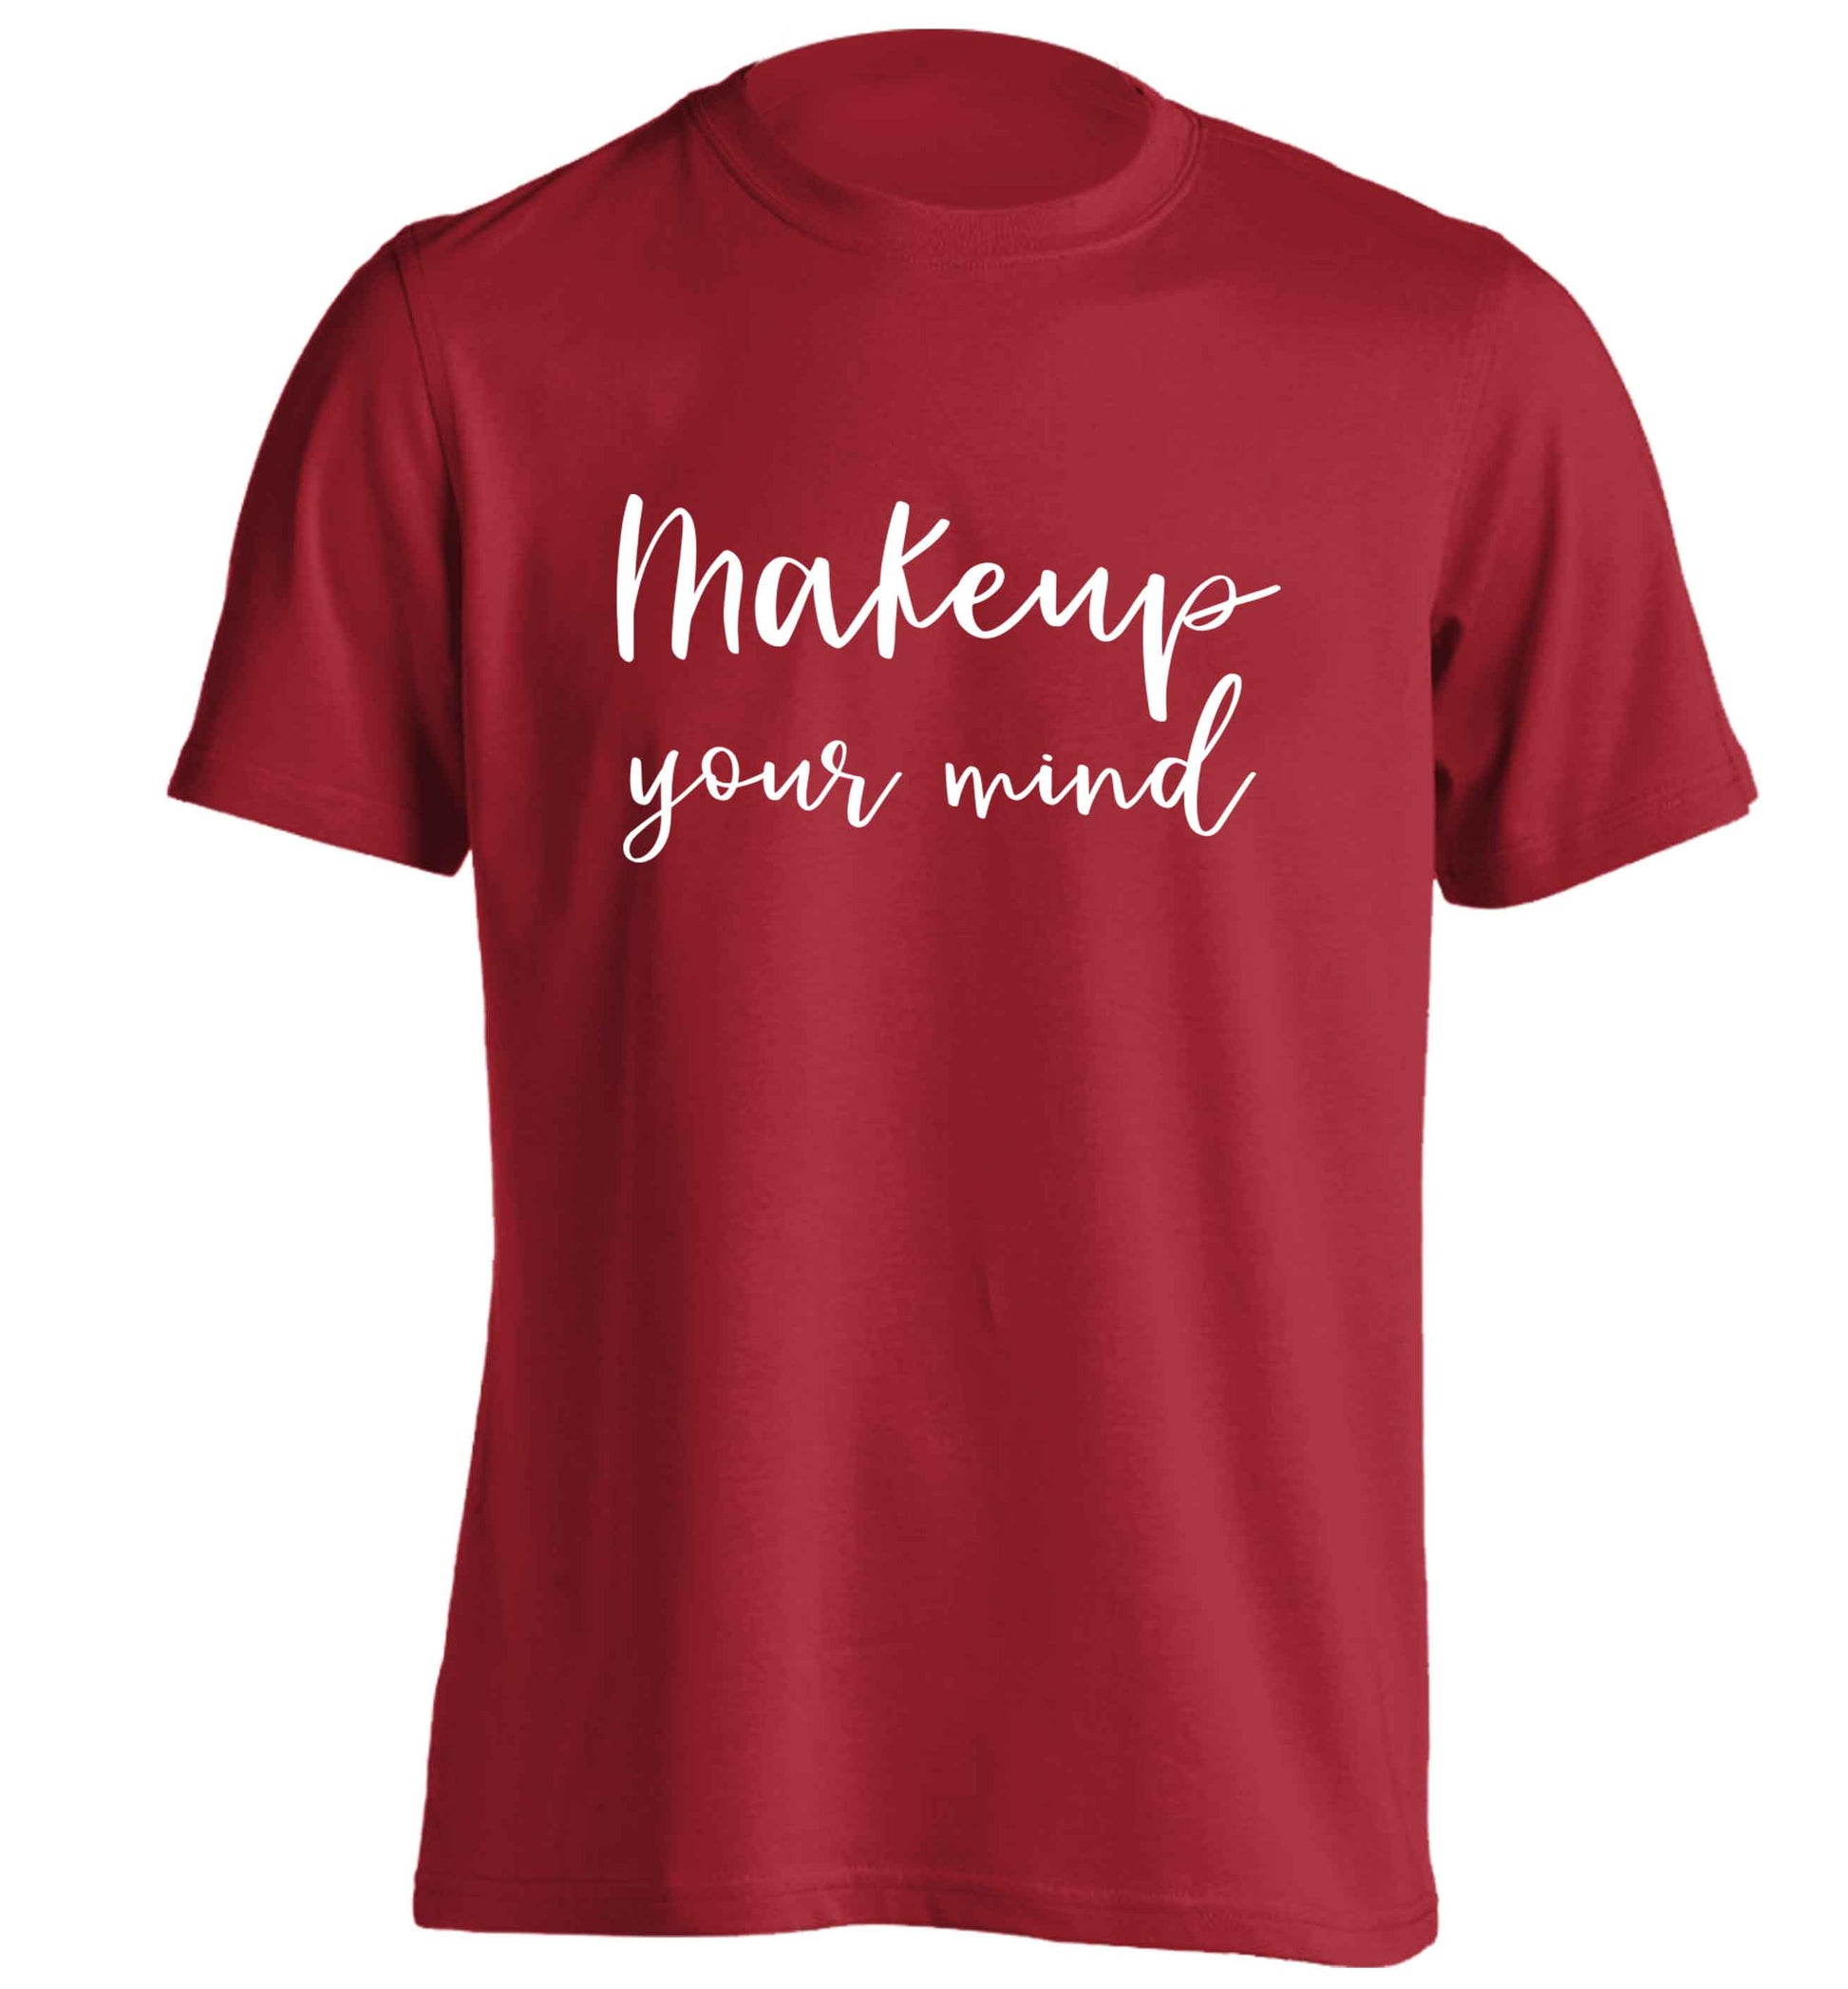 Makeup your mind adults unisex red Tshirt 2XL